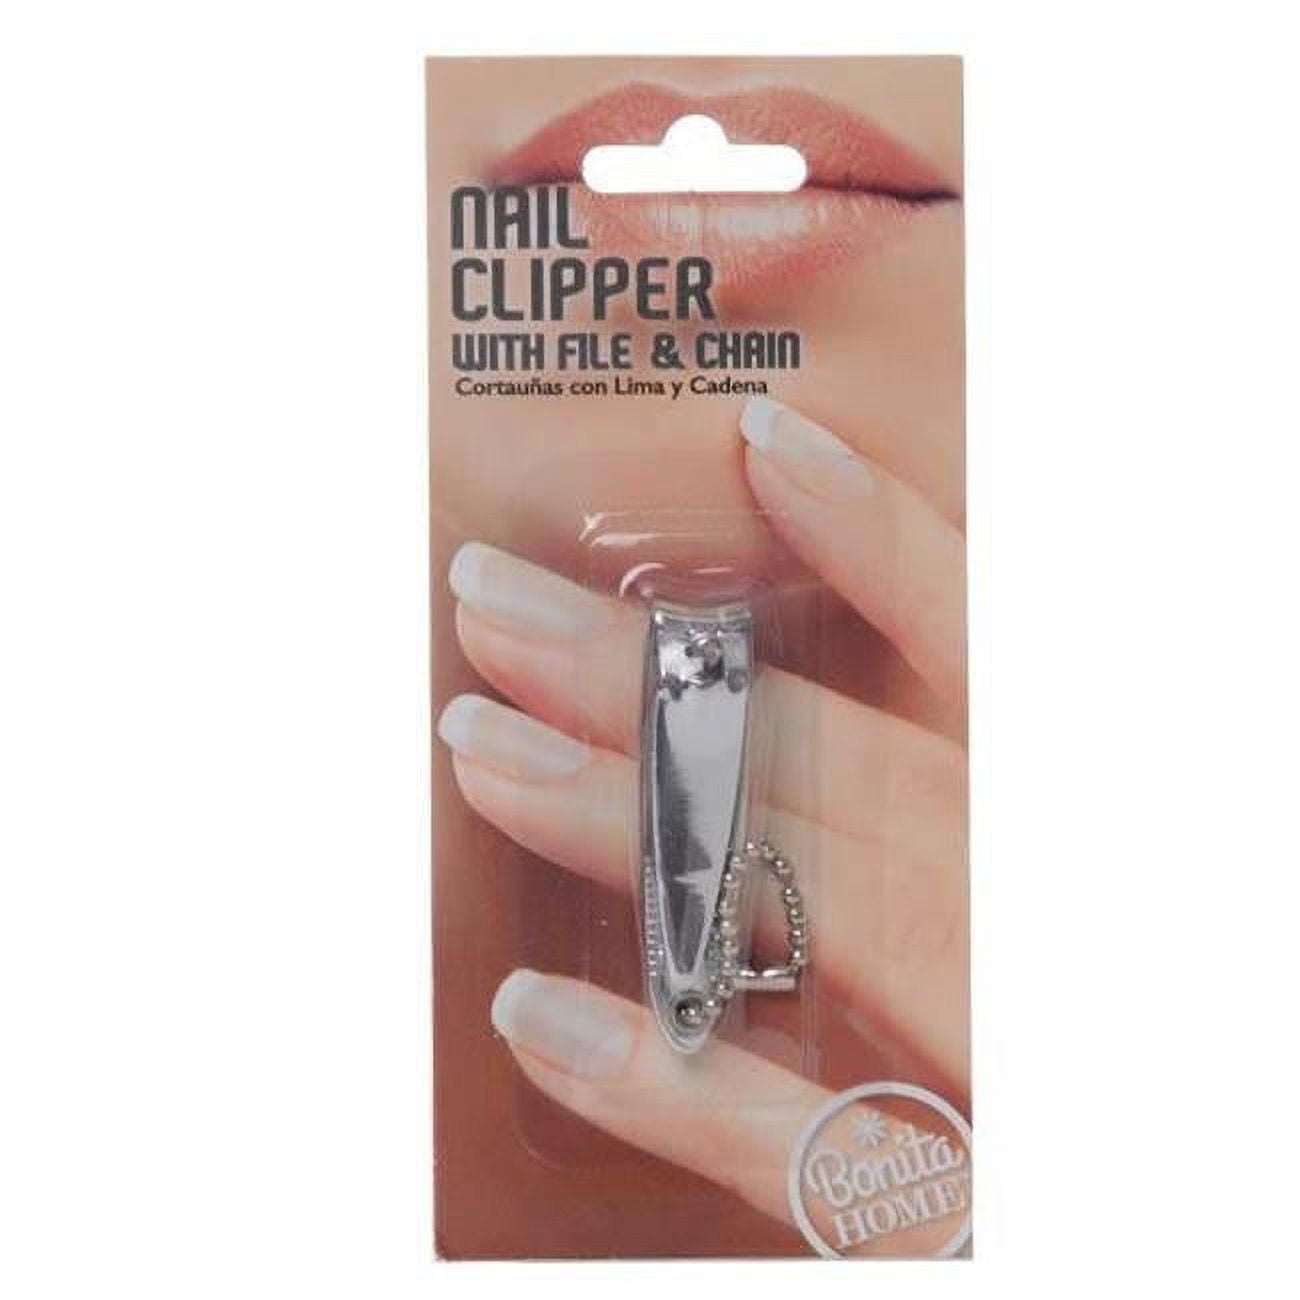 2324390 Small Nail Clipper With File & Chain - Case Of 144